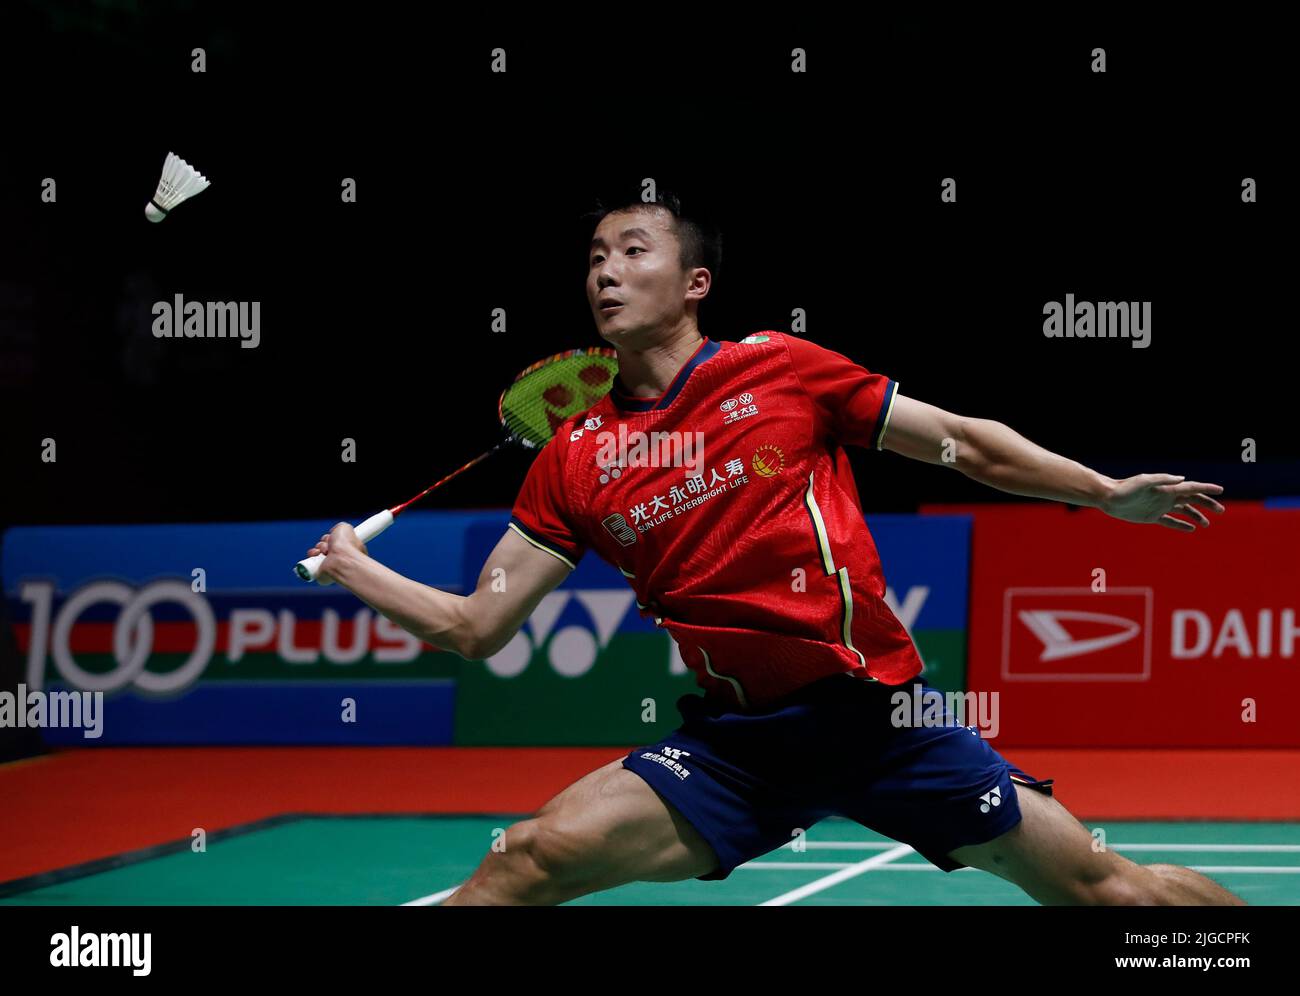 Lu Guang Zu of China competes against Chico Aura Dwi Wardoyo of Indonesia during the Mens Single semi-finals match of the Perodua Malaysia Masters 2022 at Axiata Arena, Bukit Jalil